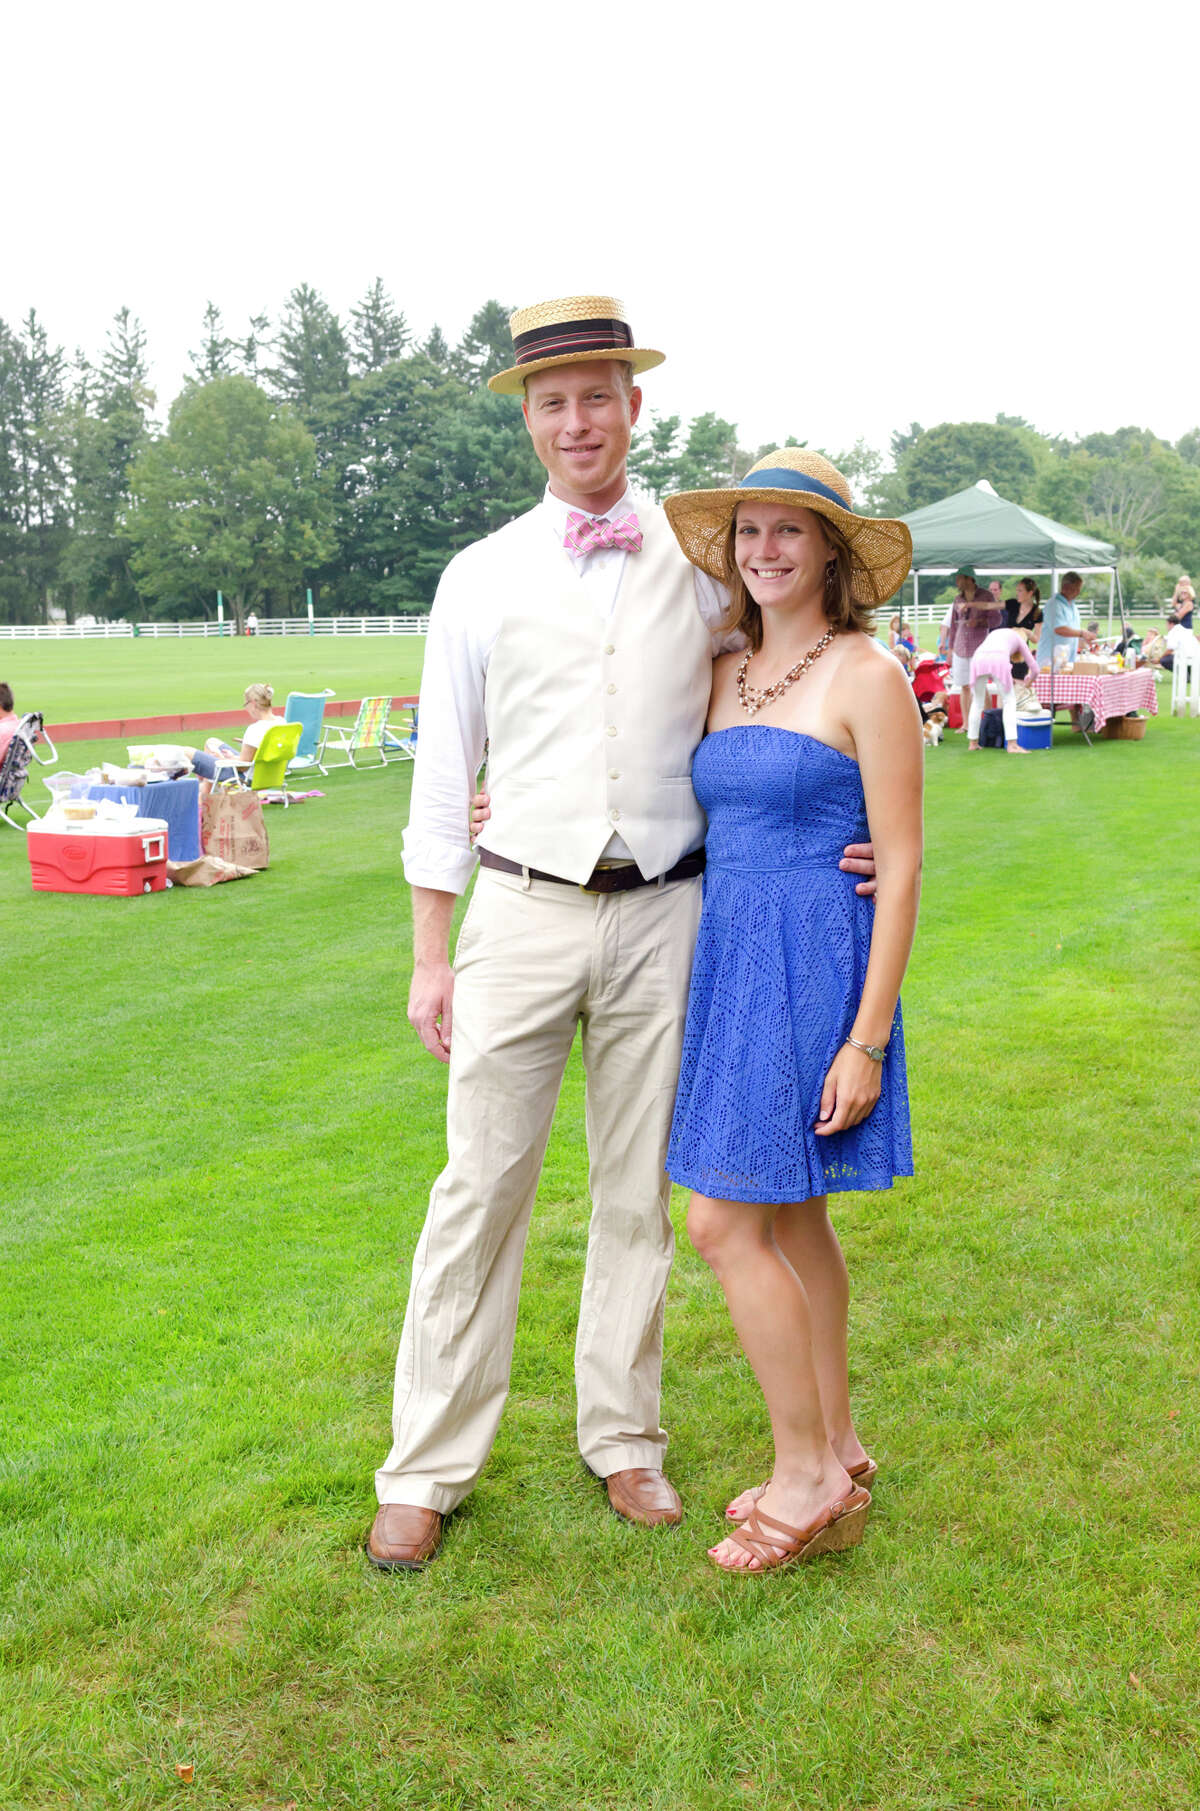 At the Greenwich Polo Club, crowd has a flair for high society fashion